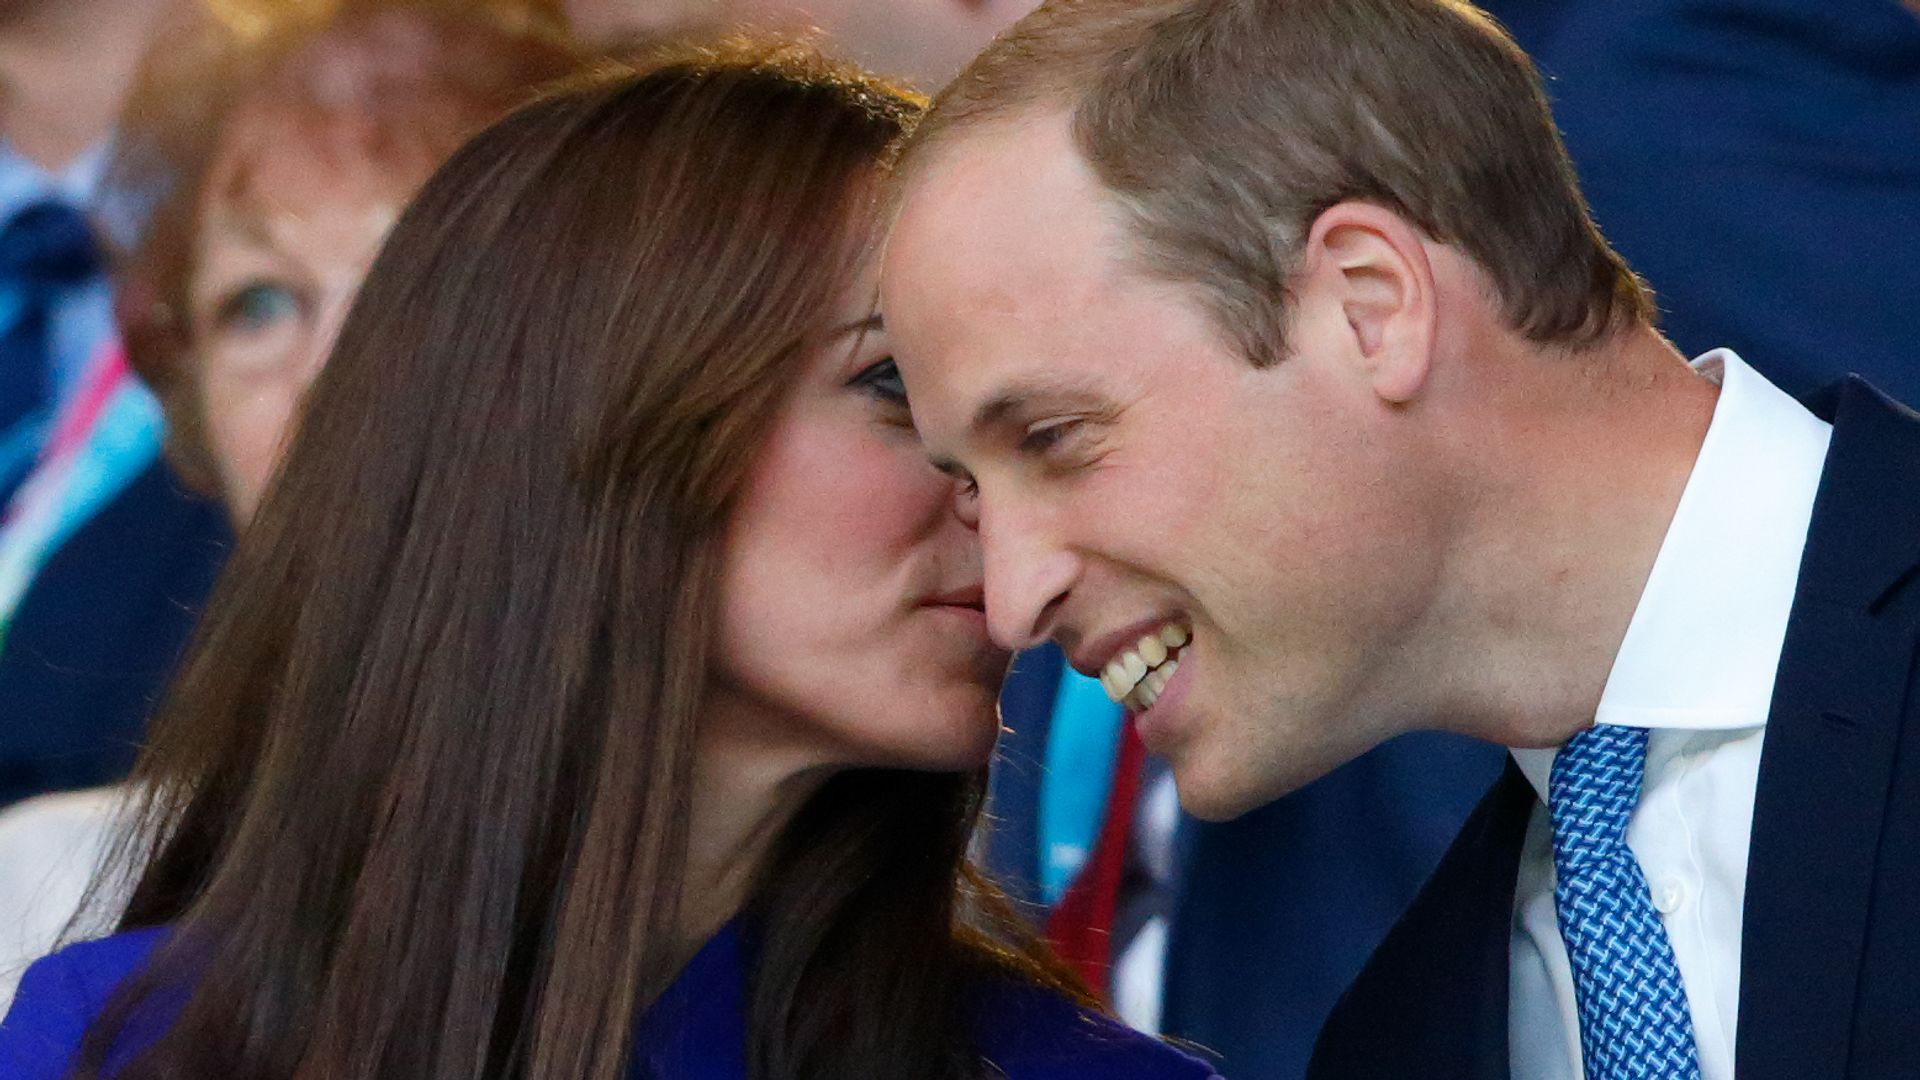 Princess Kate whispering to Prince William in 2015